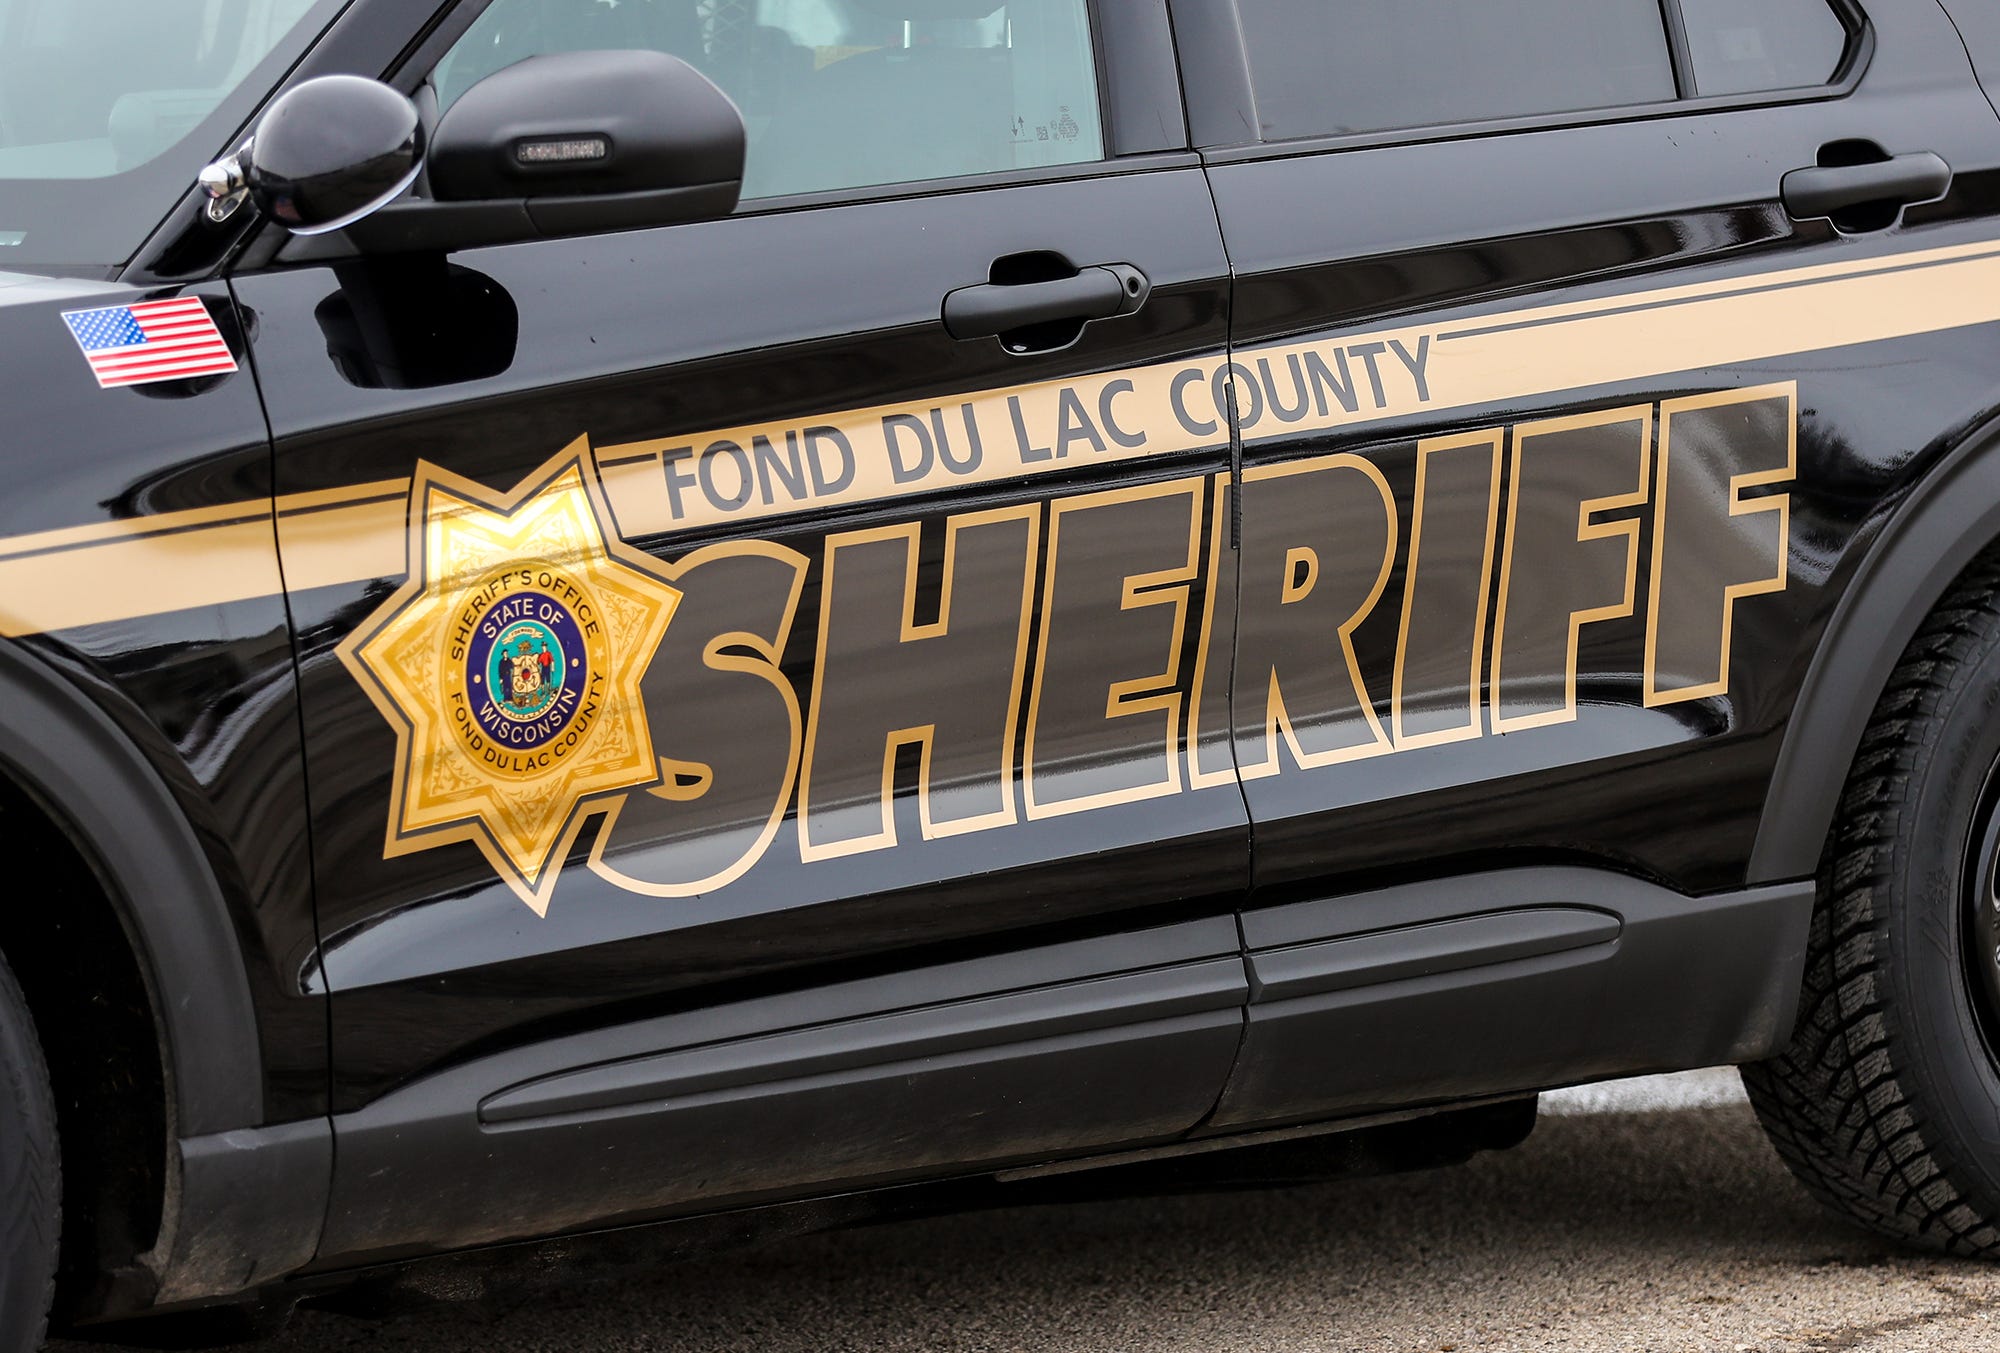 1 person arrested in Fond du Lac County after leading sheriff’s ...